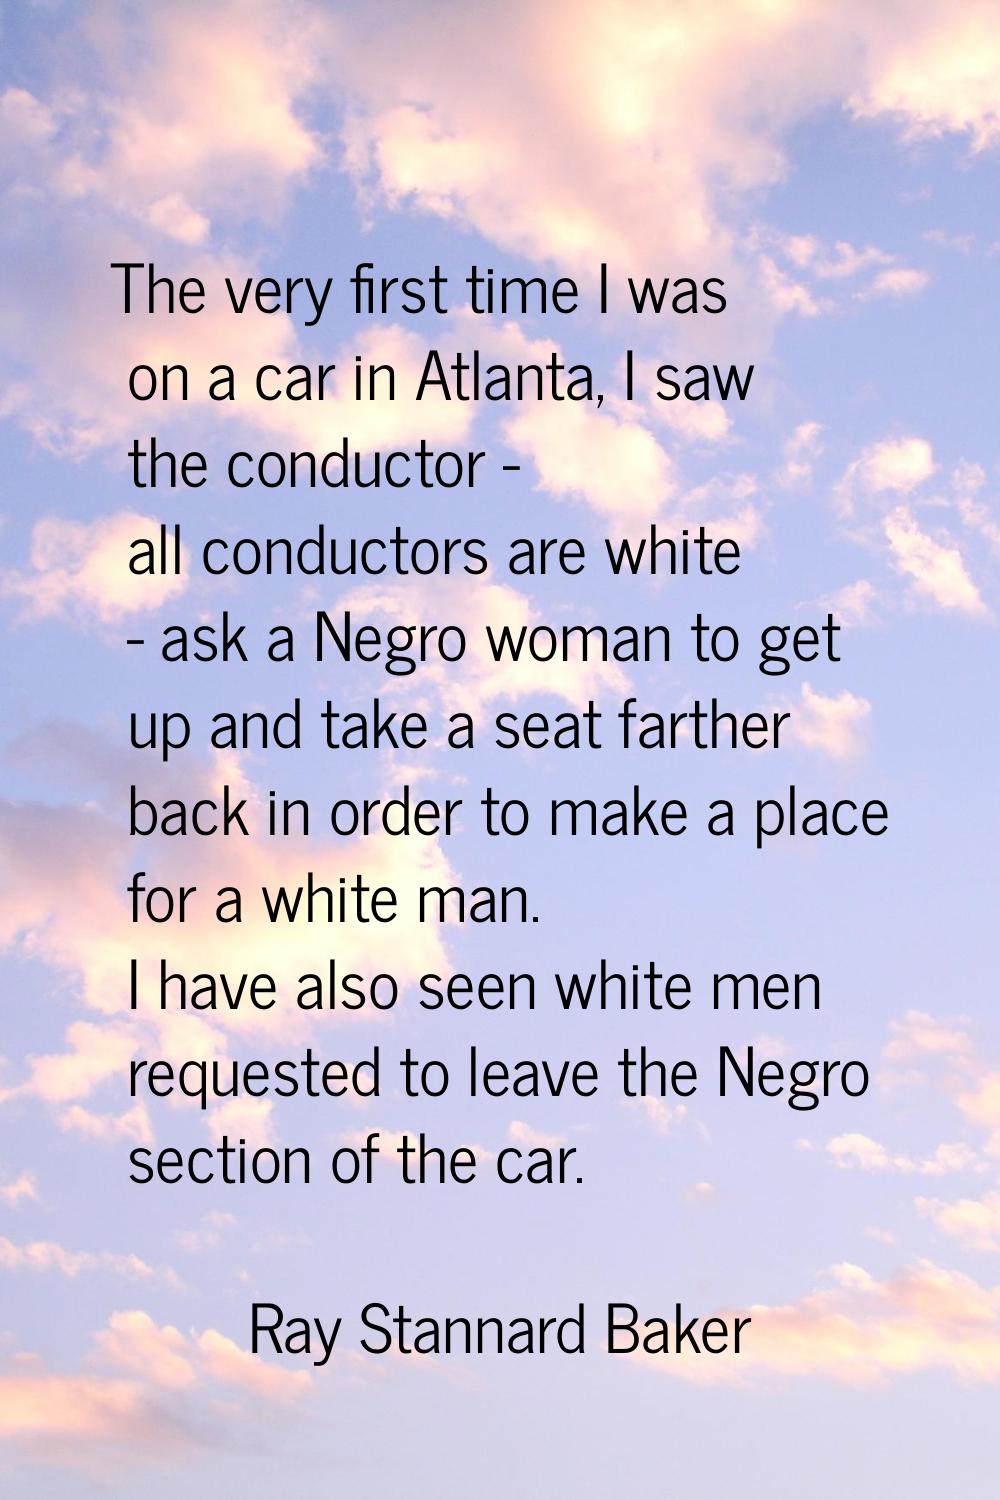 The very first time I was on a car in Atlanta, I saw the conductor - all conductors are white - ask